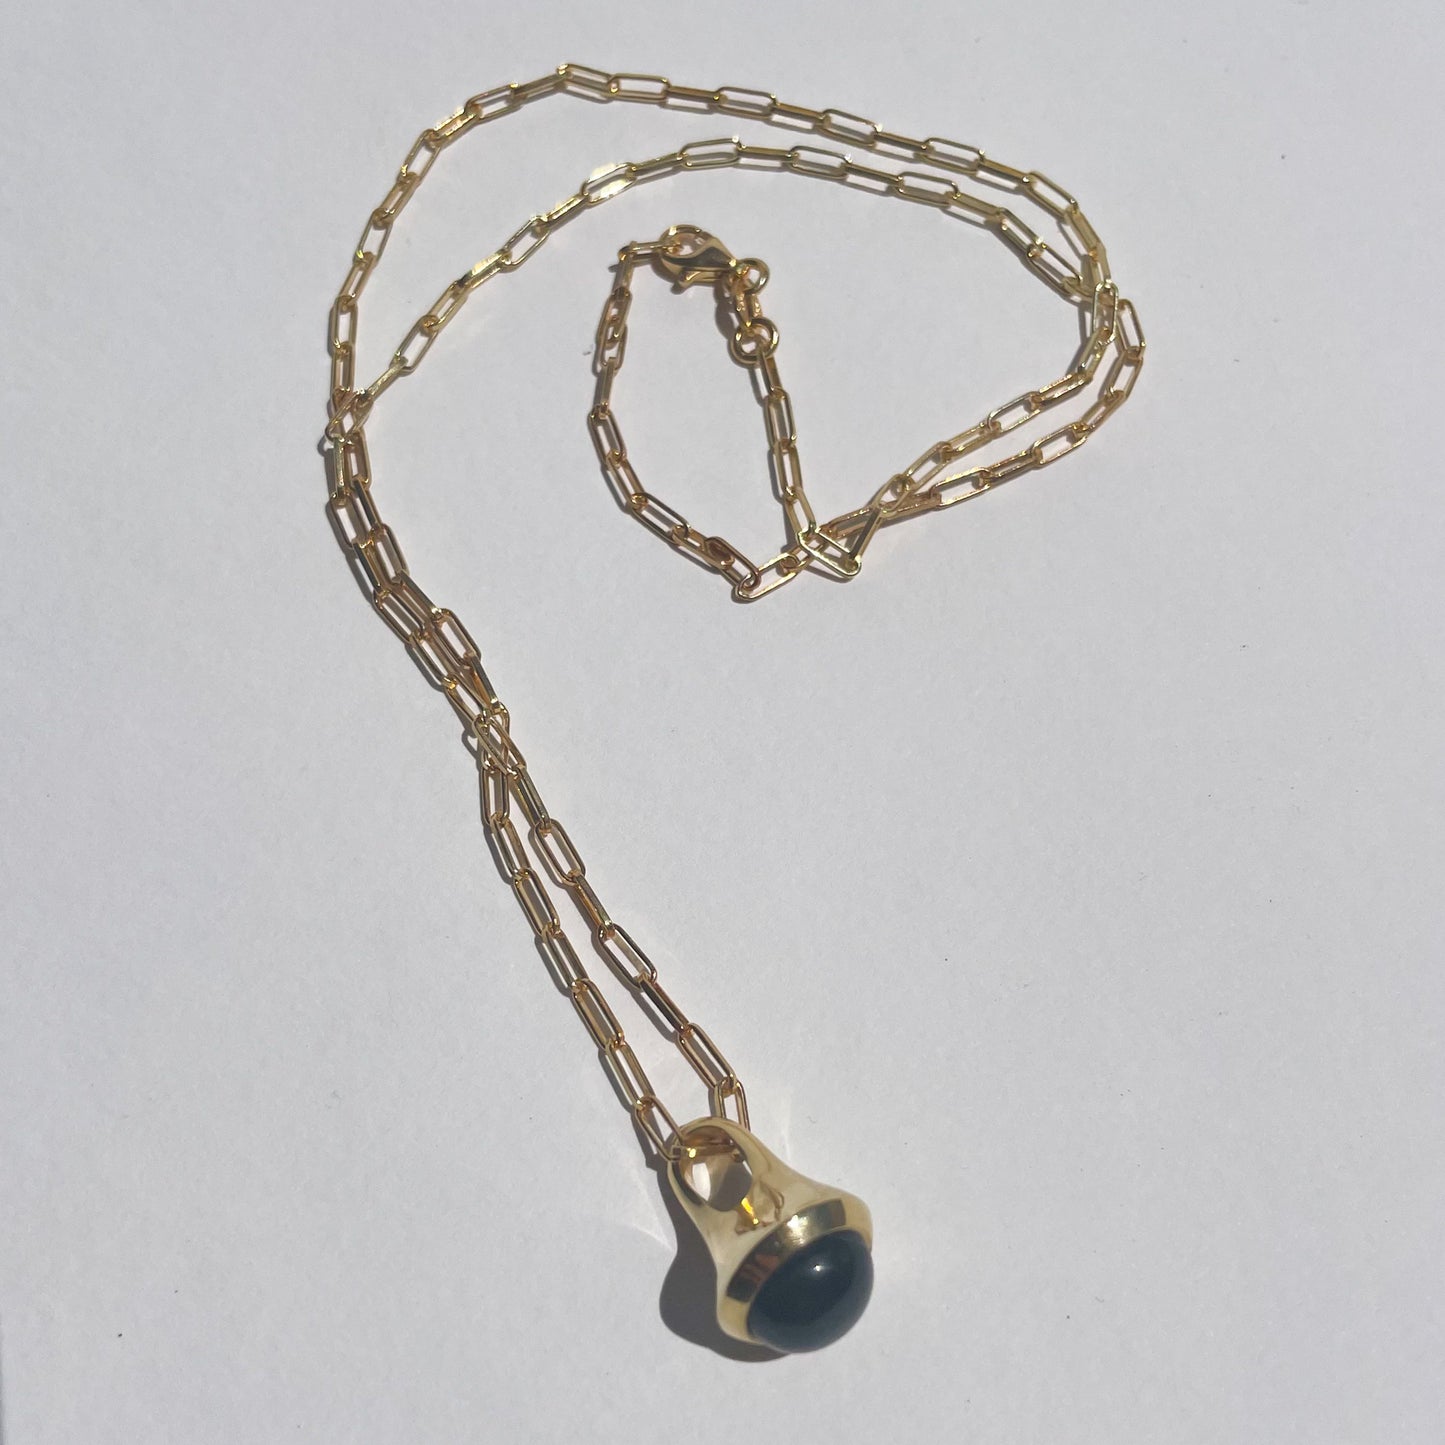 Gold Plated Drop Pendant -Medium (9 or 10mm stone) on 45/50/55cm chain